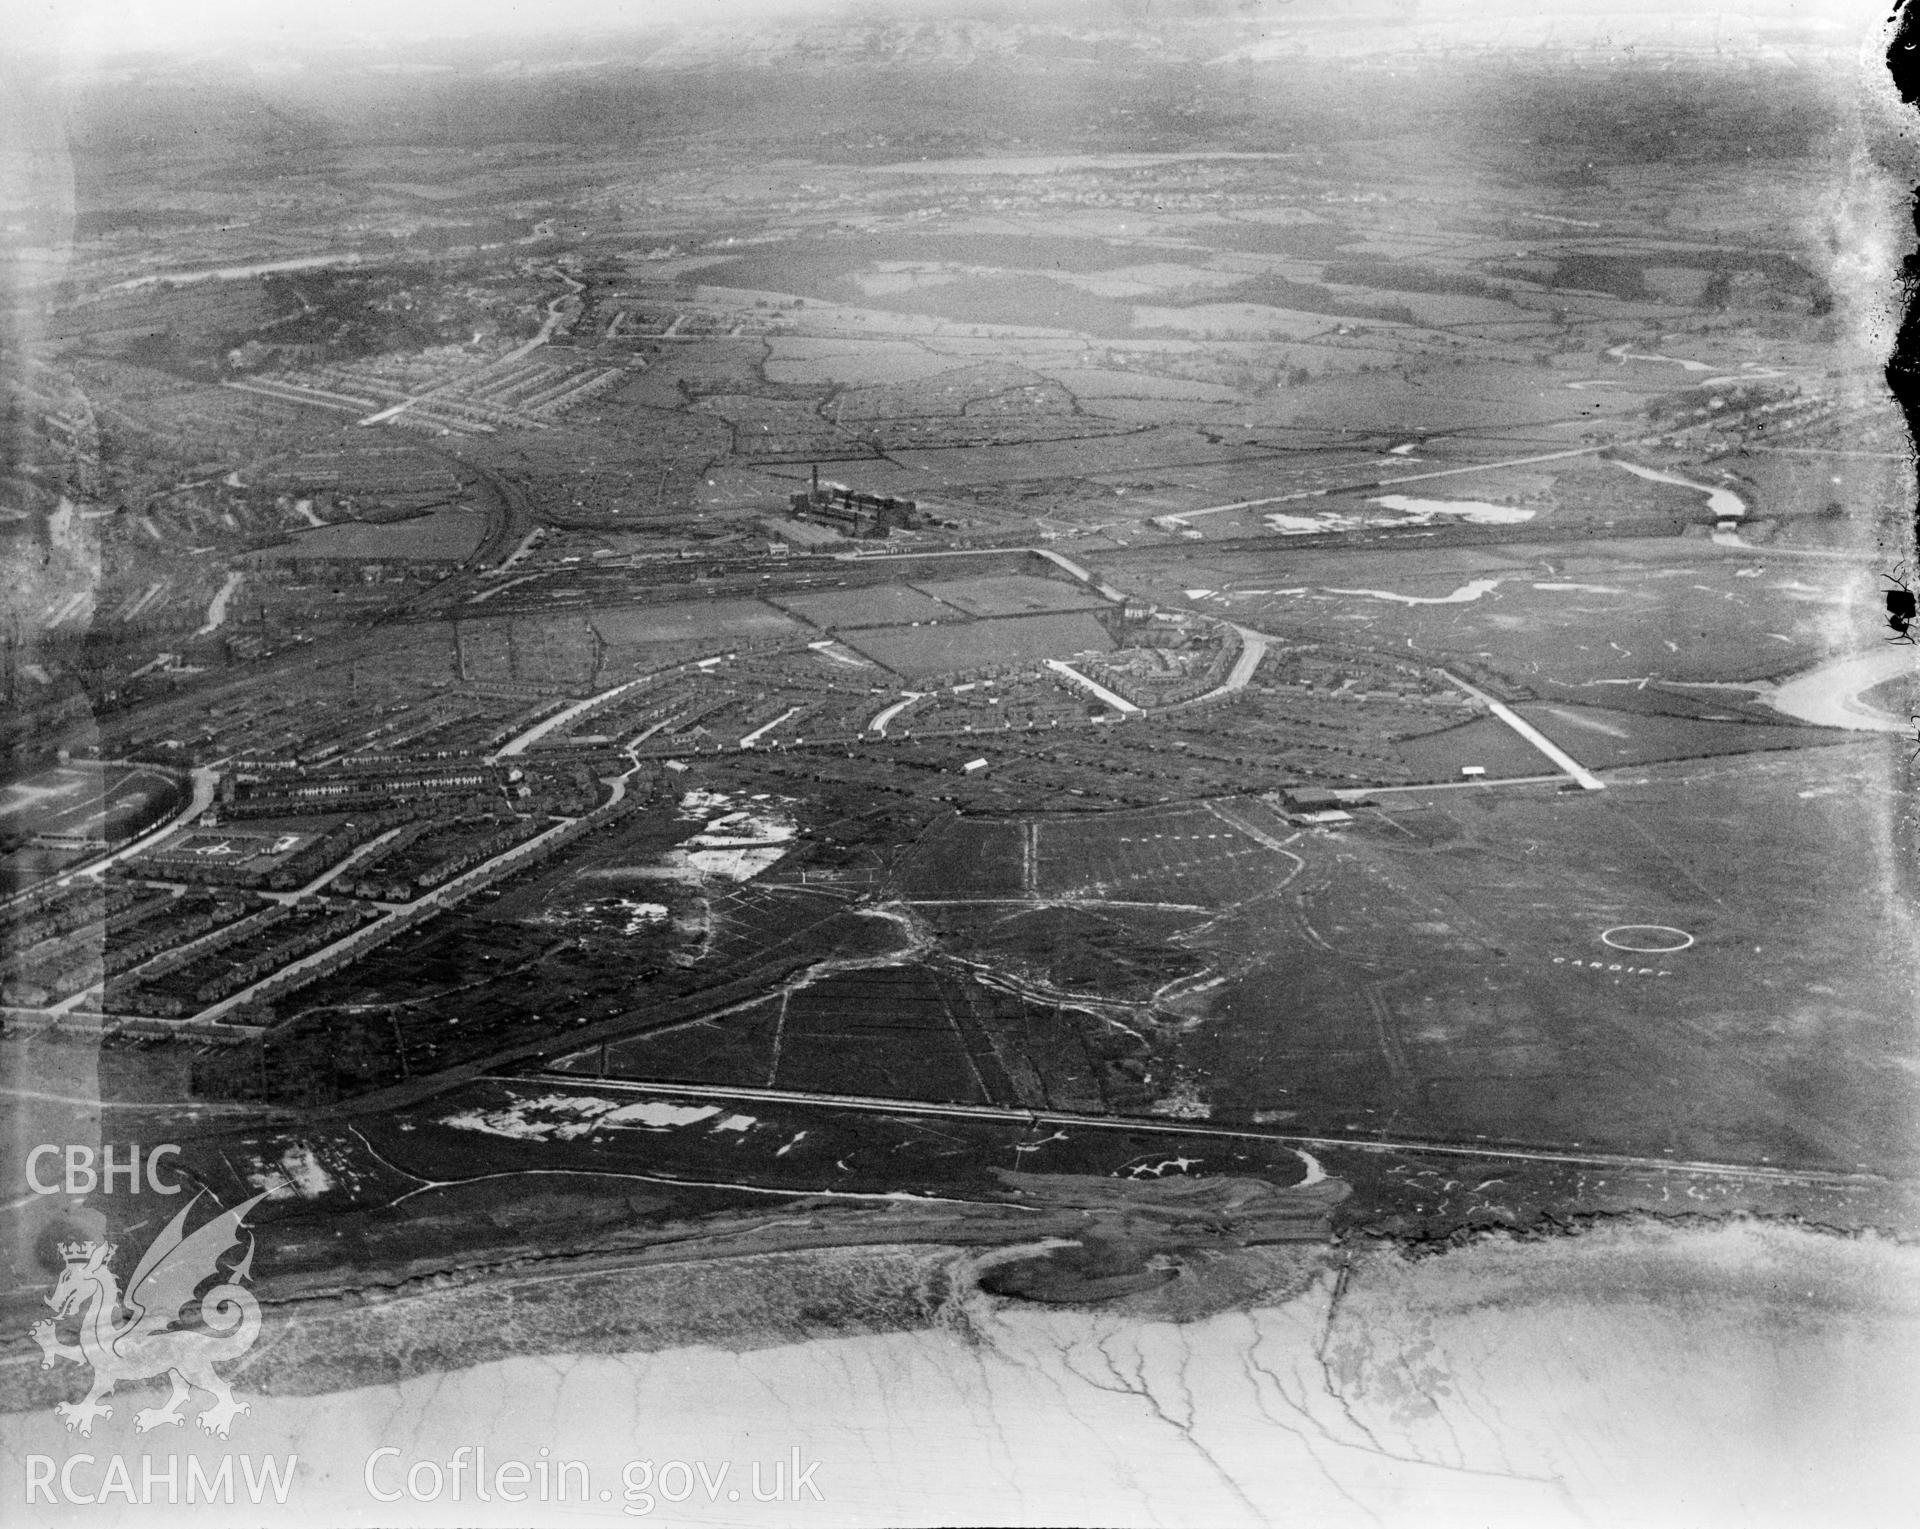 Distant view of new housing at Newport, oblique aerial view. 5?x4? black and white glass plate negative.